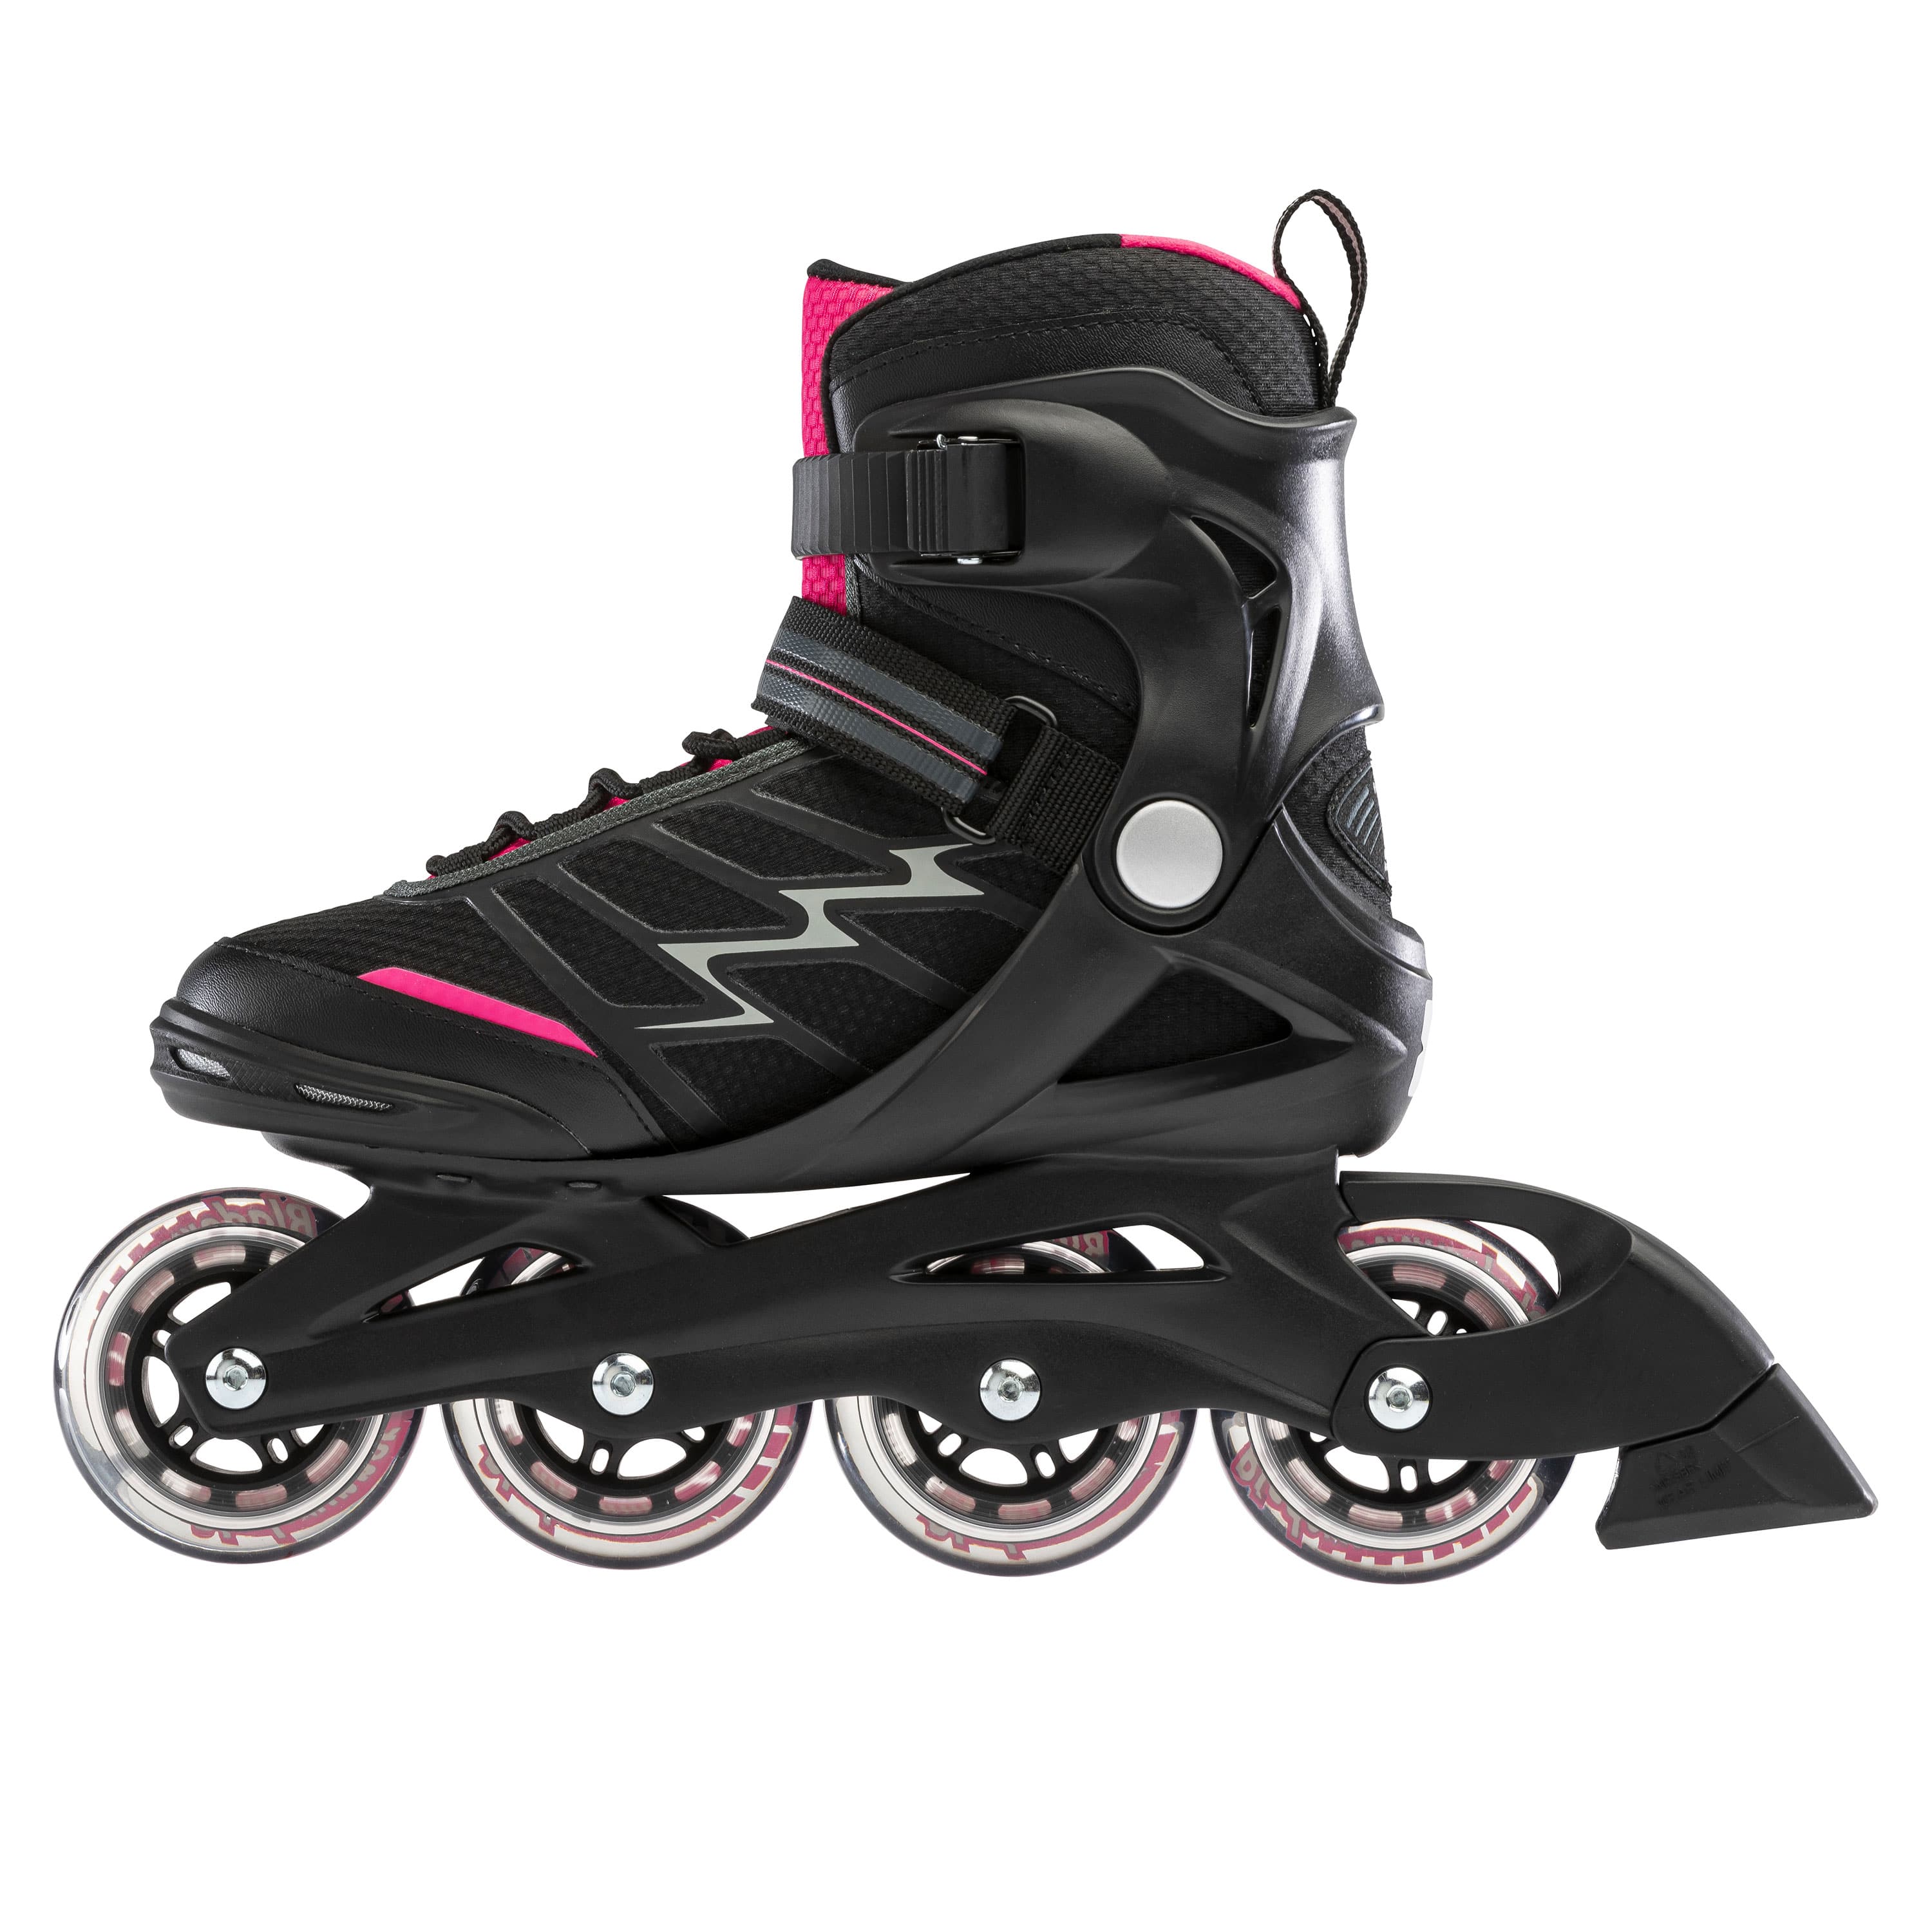 Blade Runner Pro 80 by Rollerblade women's sizes 7 or 10 NEW! 